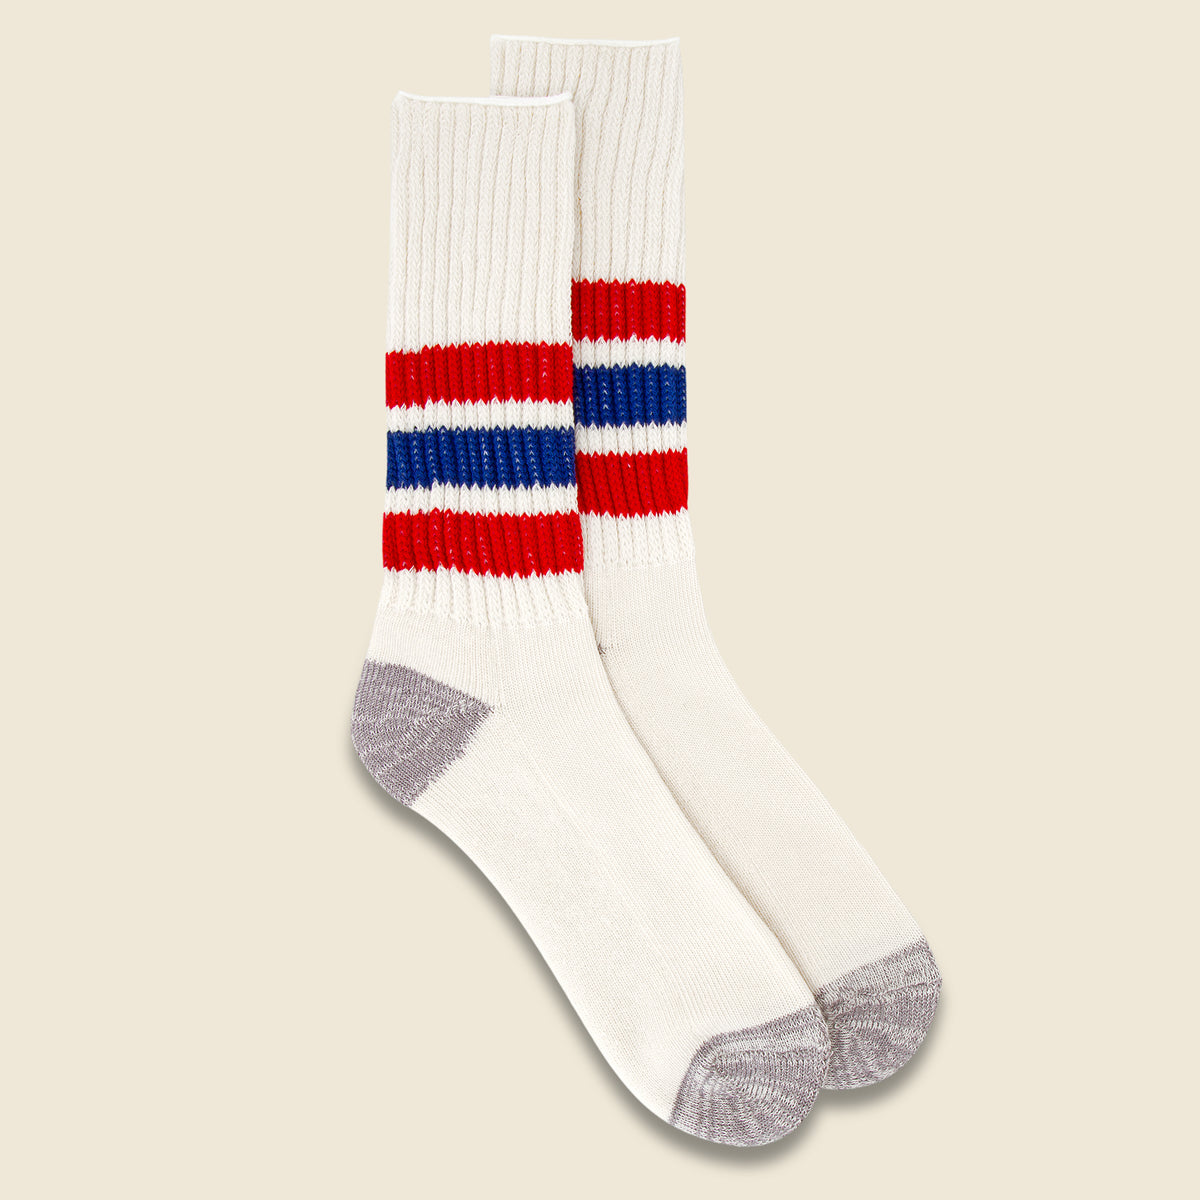 Coarse Ribbed Old School Sock - Chilli Red/Blue